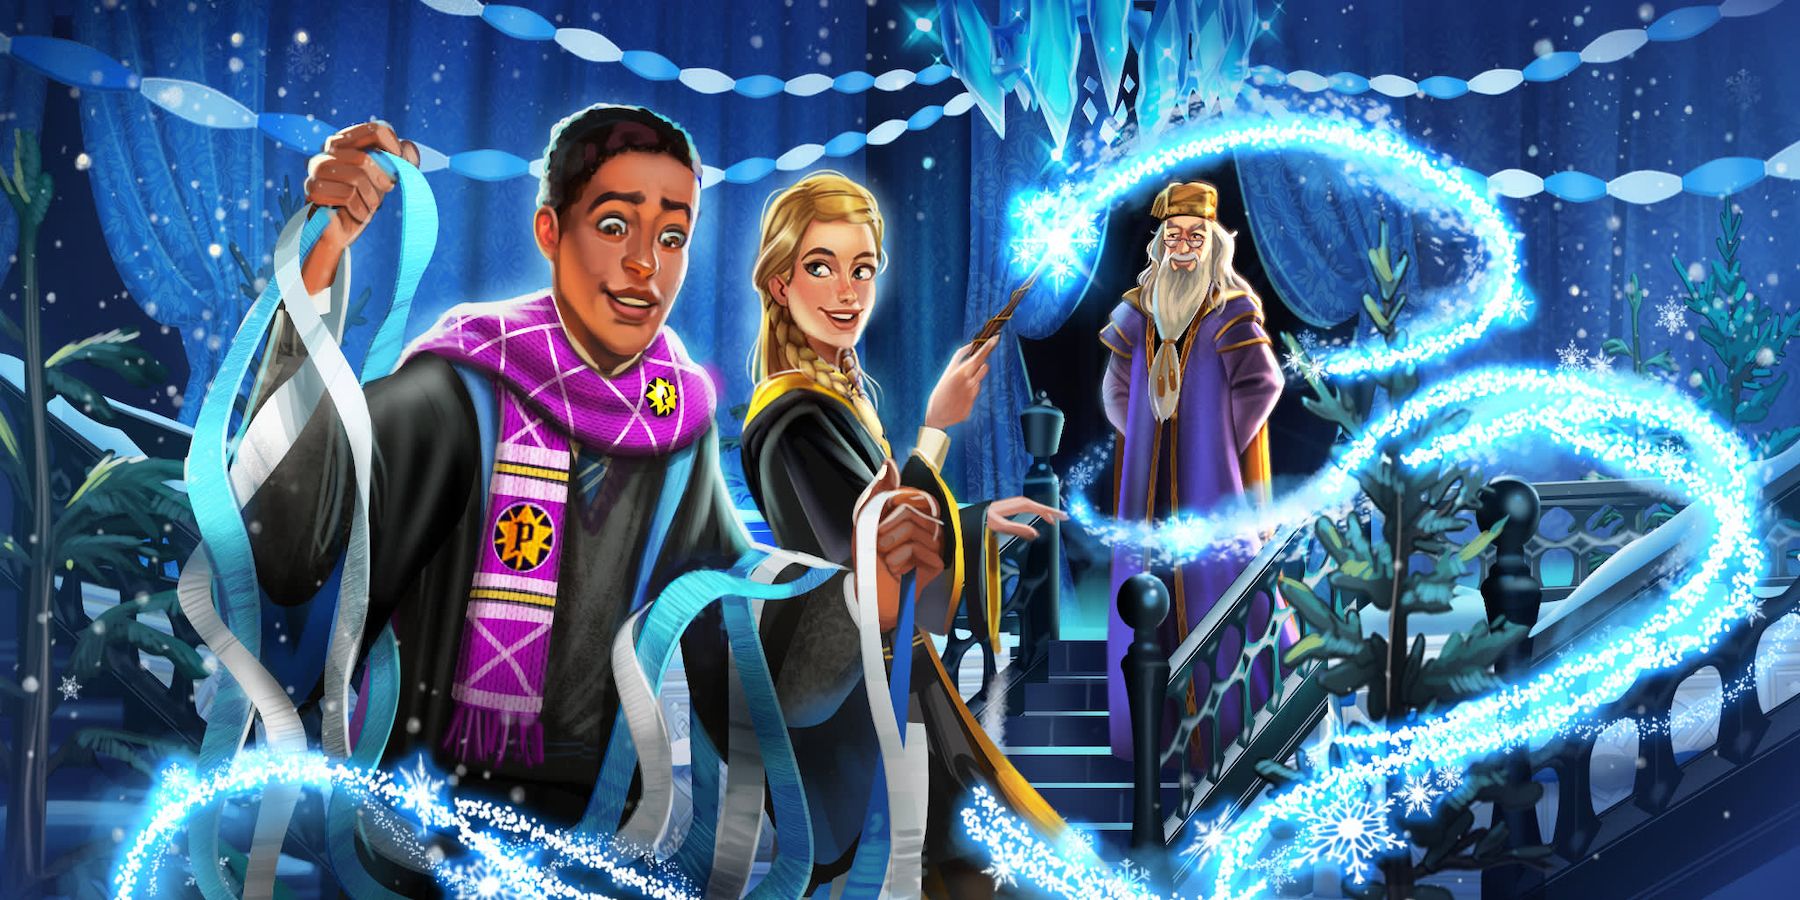 HOGWARTS MYSTERY COVER 3